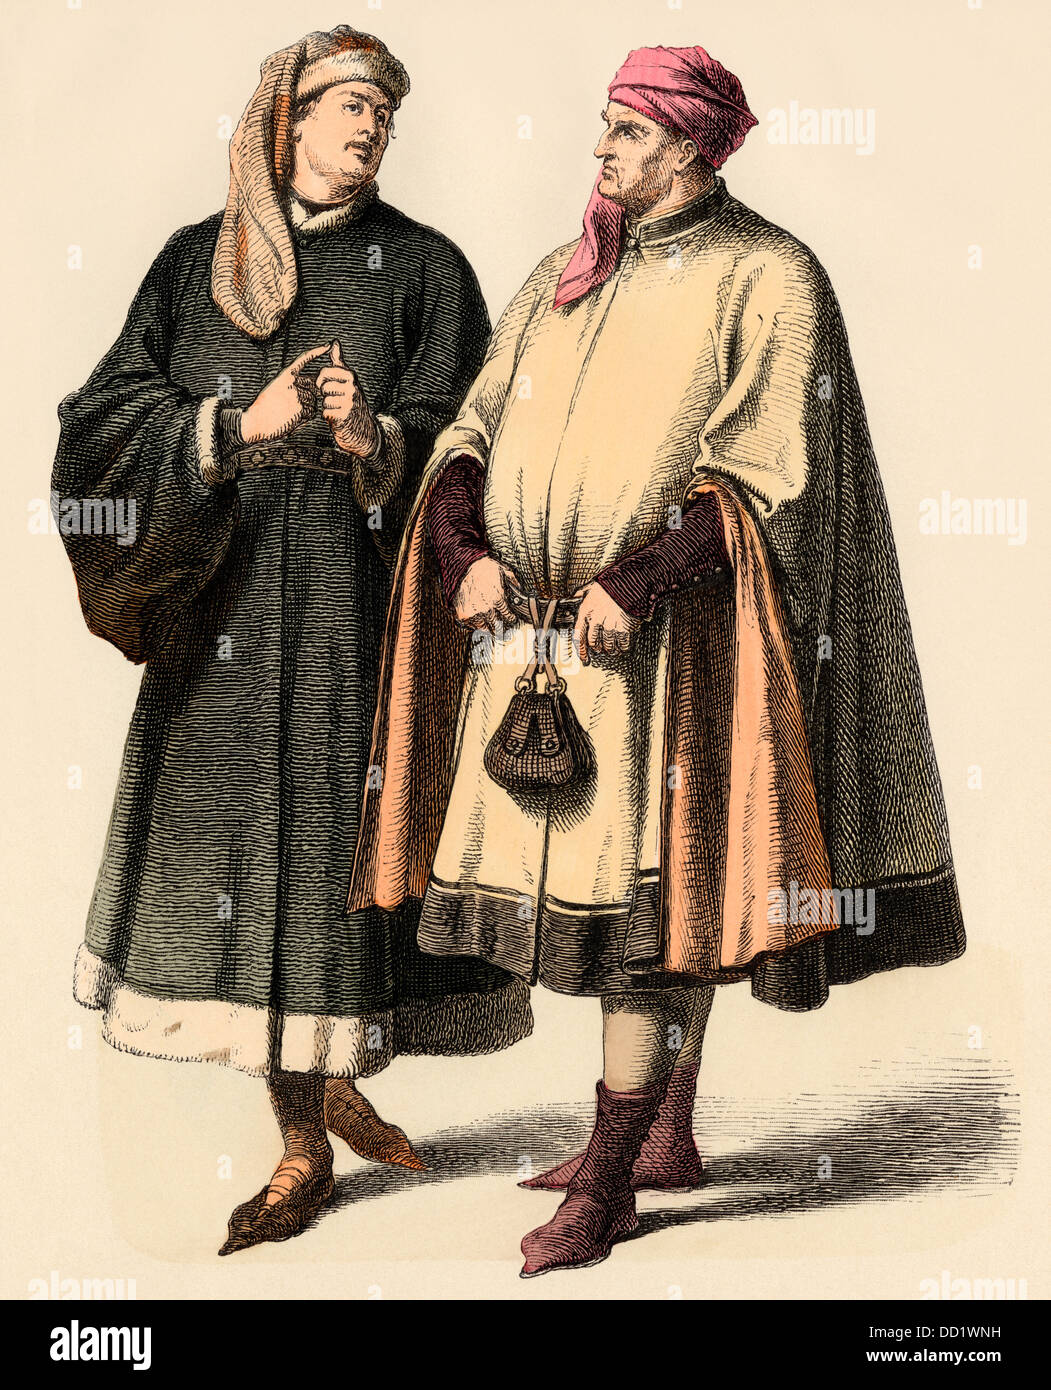 German patricians of the 14th century. Hand-colored print Stock Photo